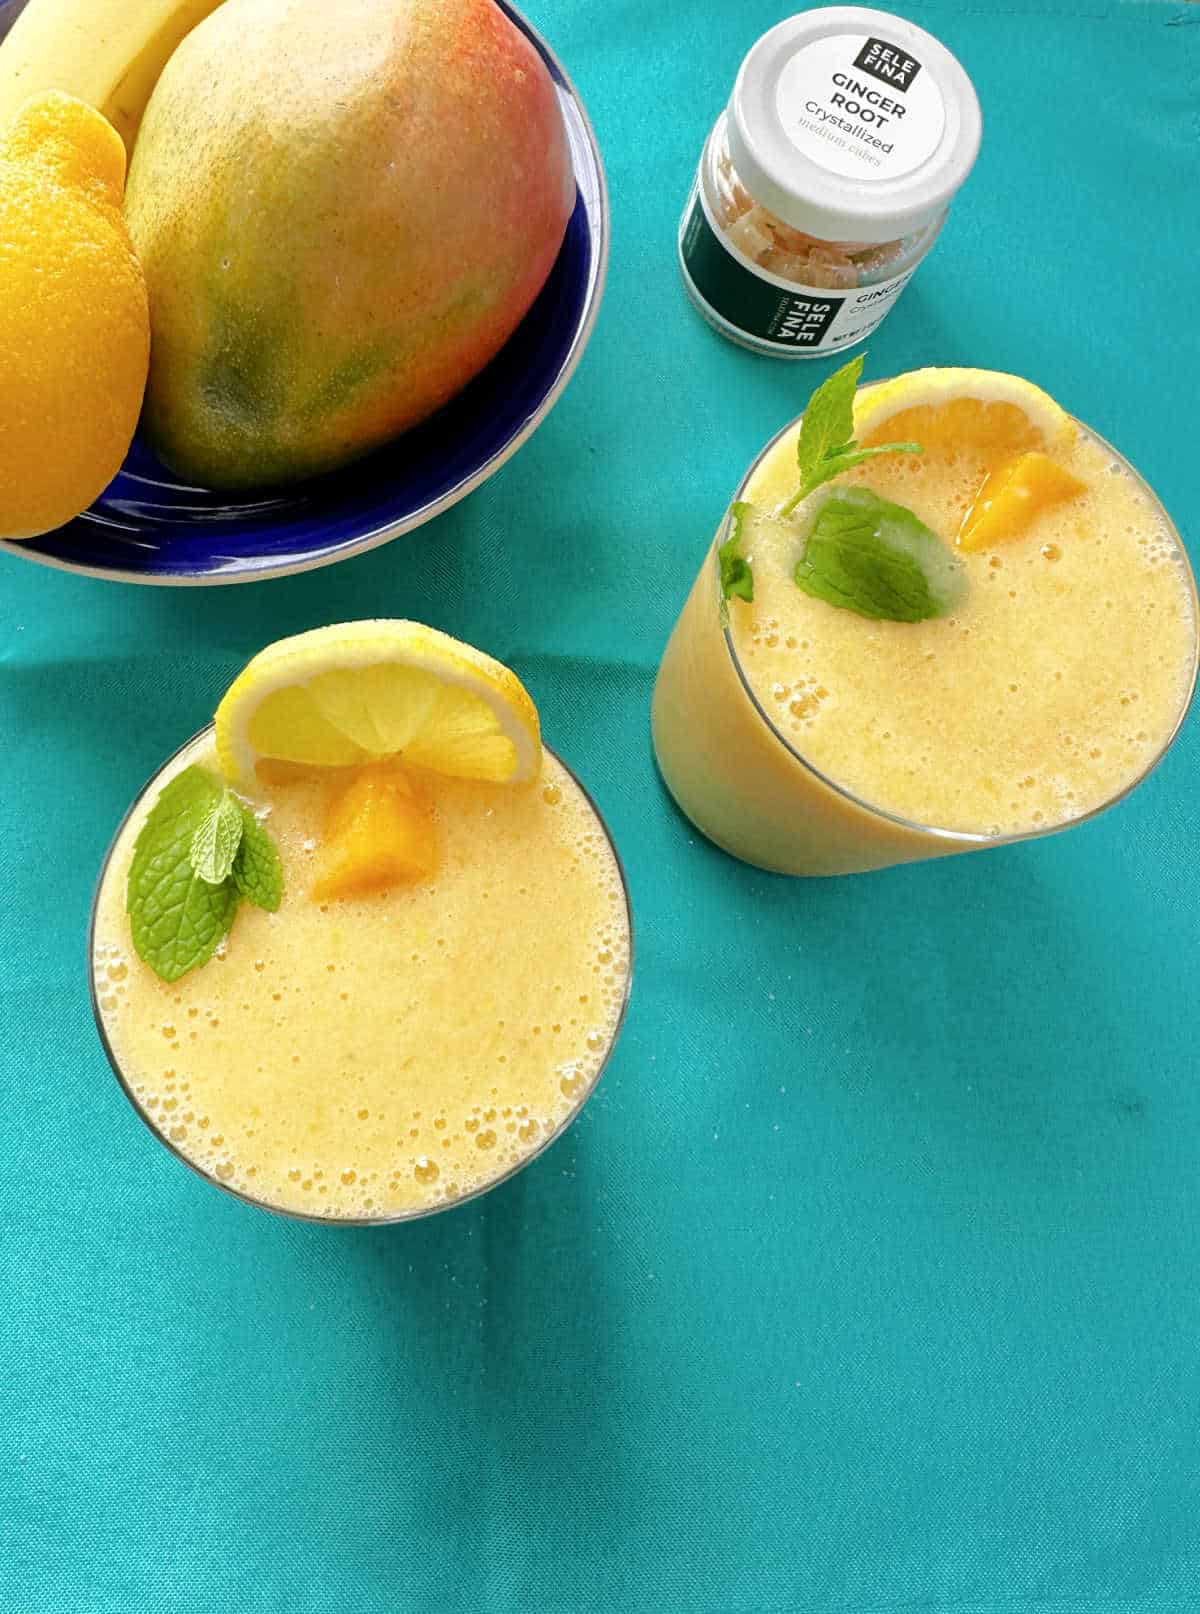 Overhead image of yellow smoothies in short glasses on a teal cloth napkin. Smoothies are garnished with lemon slices, mango pieces and fresh mint. Dark blue bowl of fruit - mango, lemon, banana. sits off to the side. 